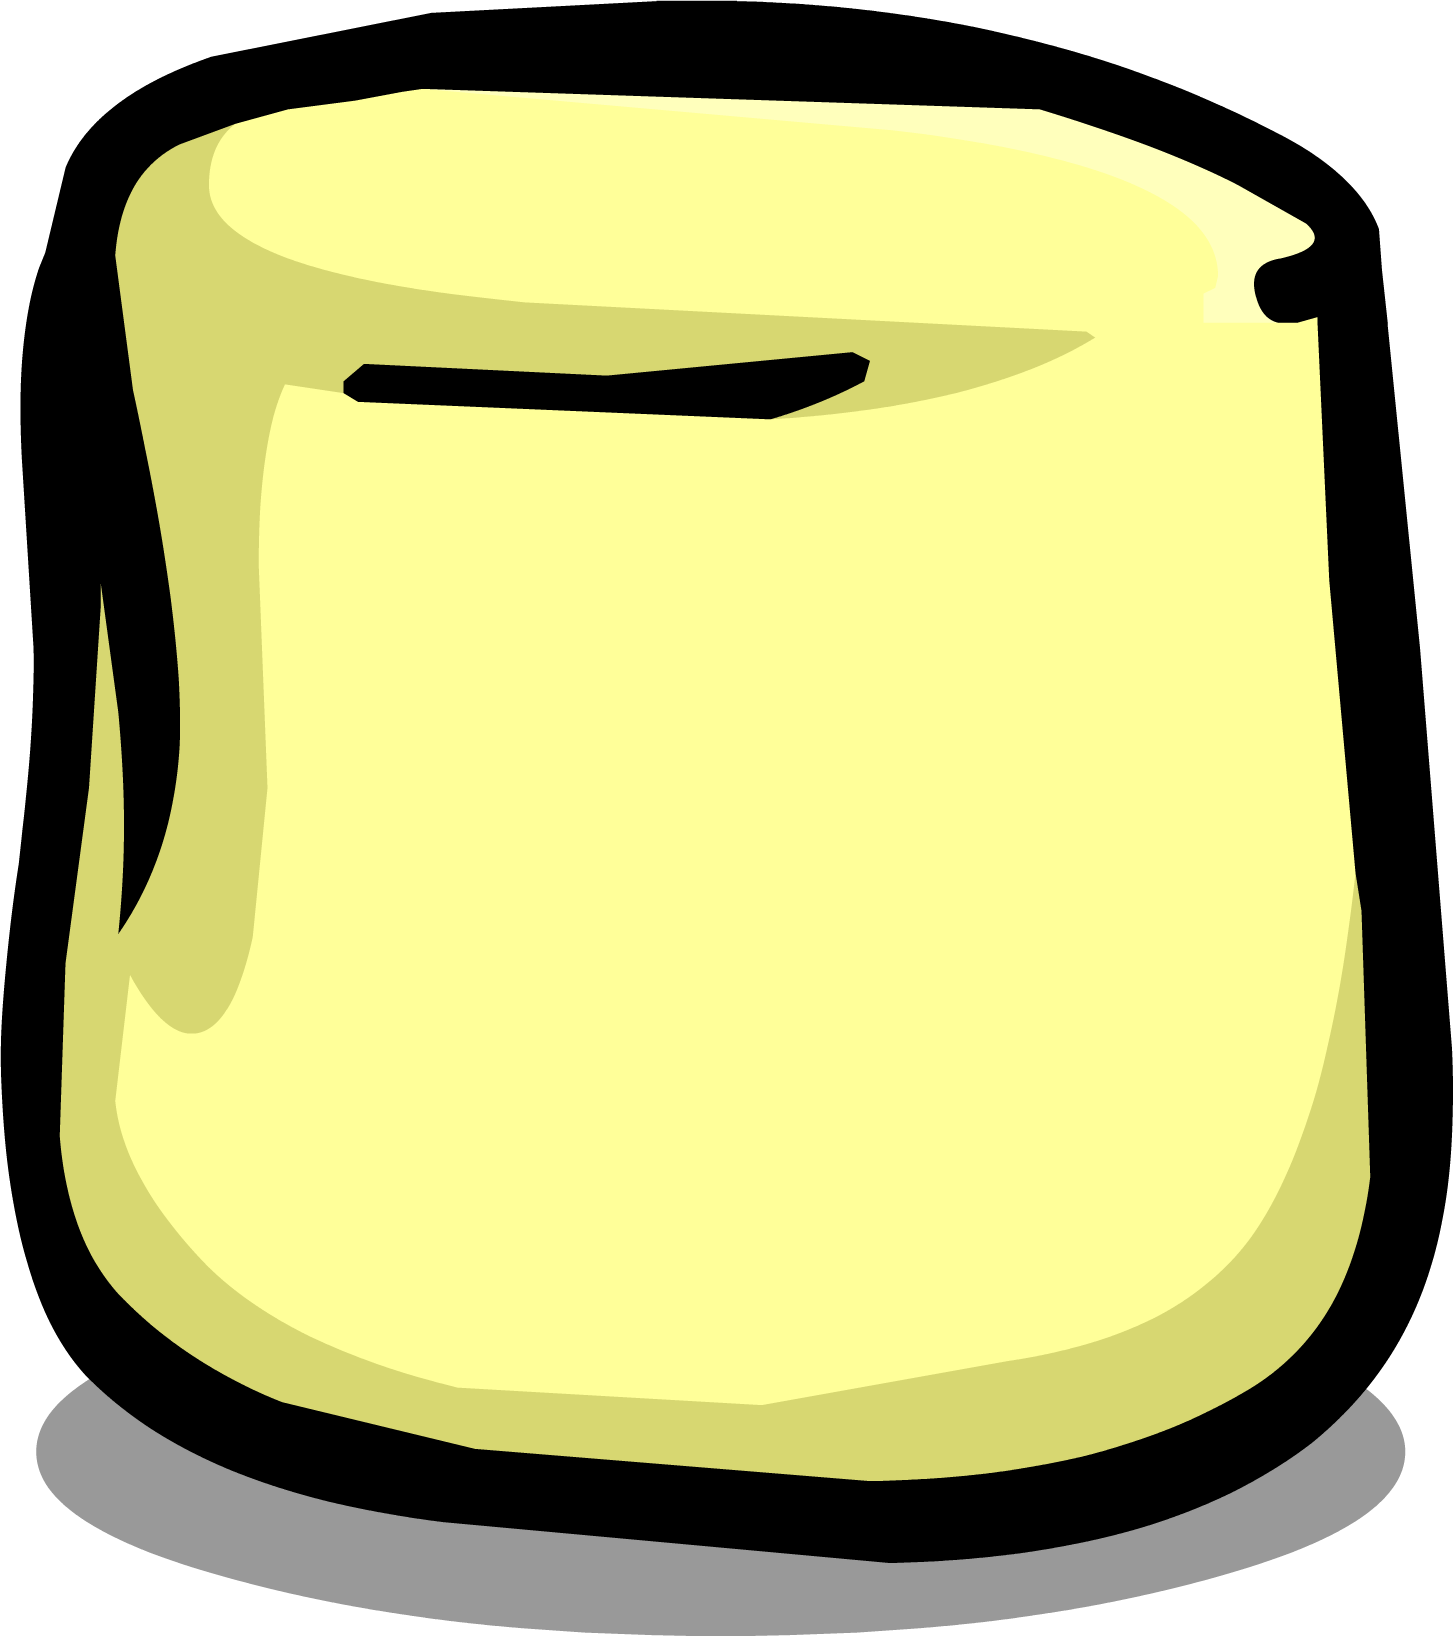 Mystery clipart file. Image marshmallow sprite png